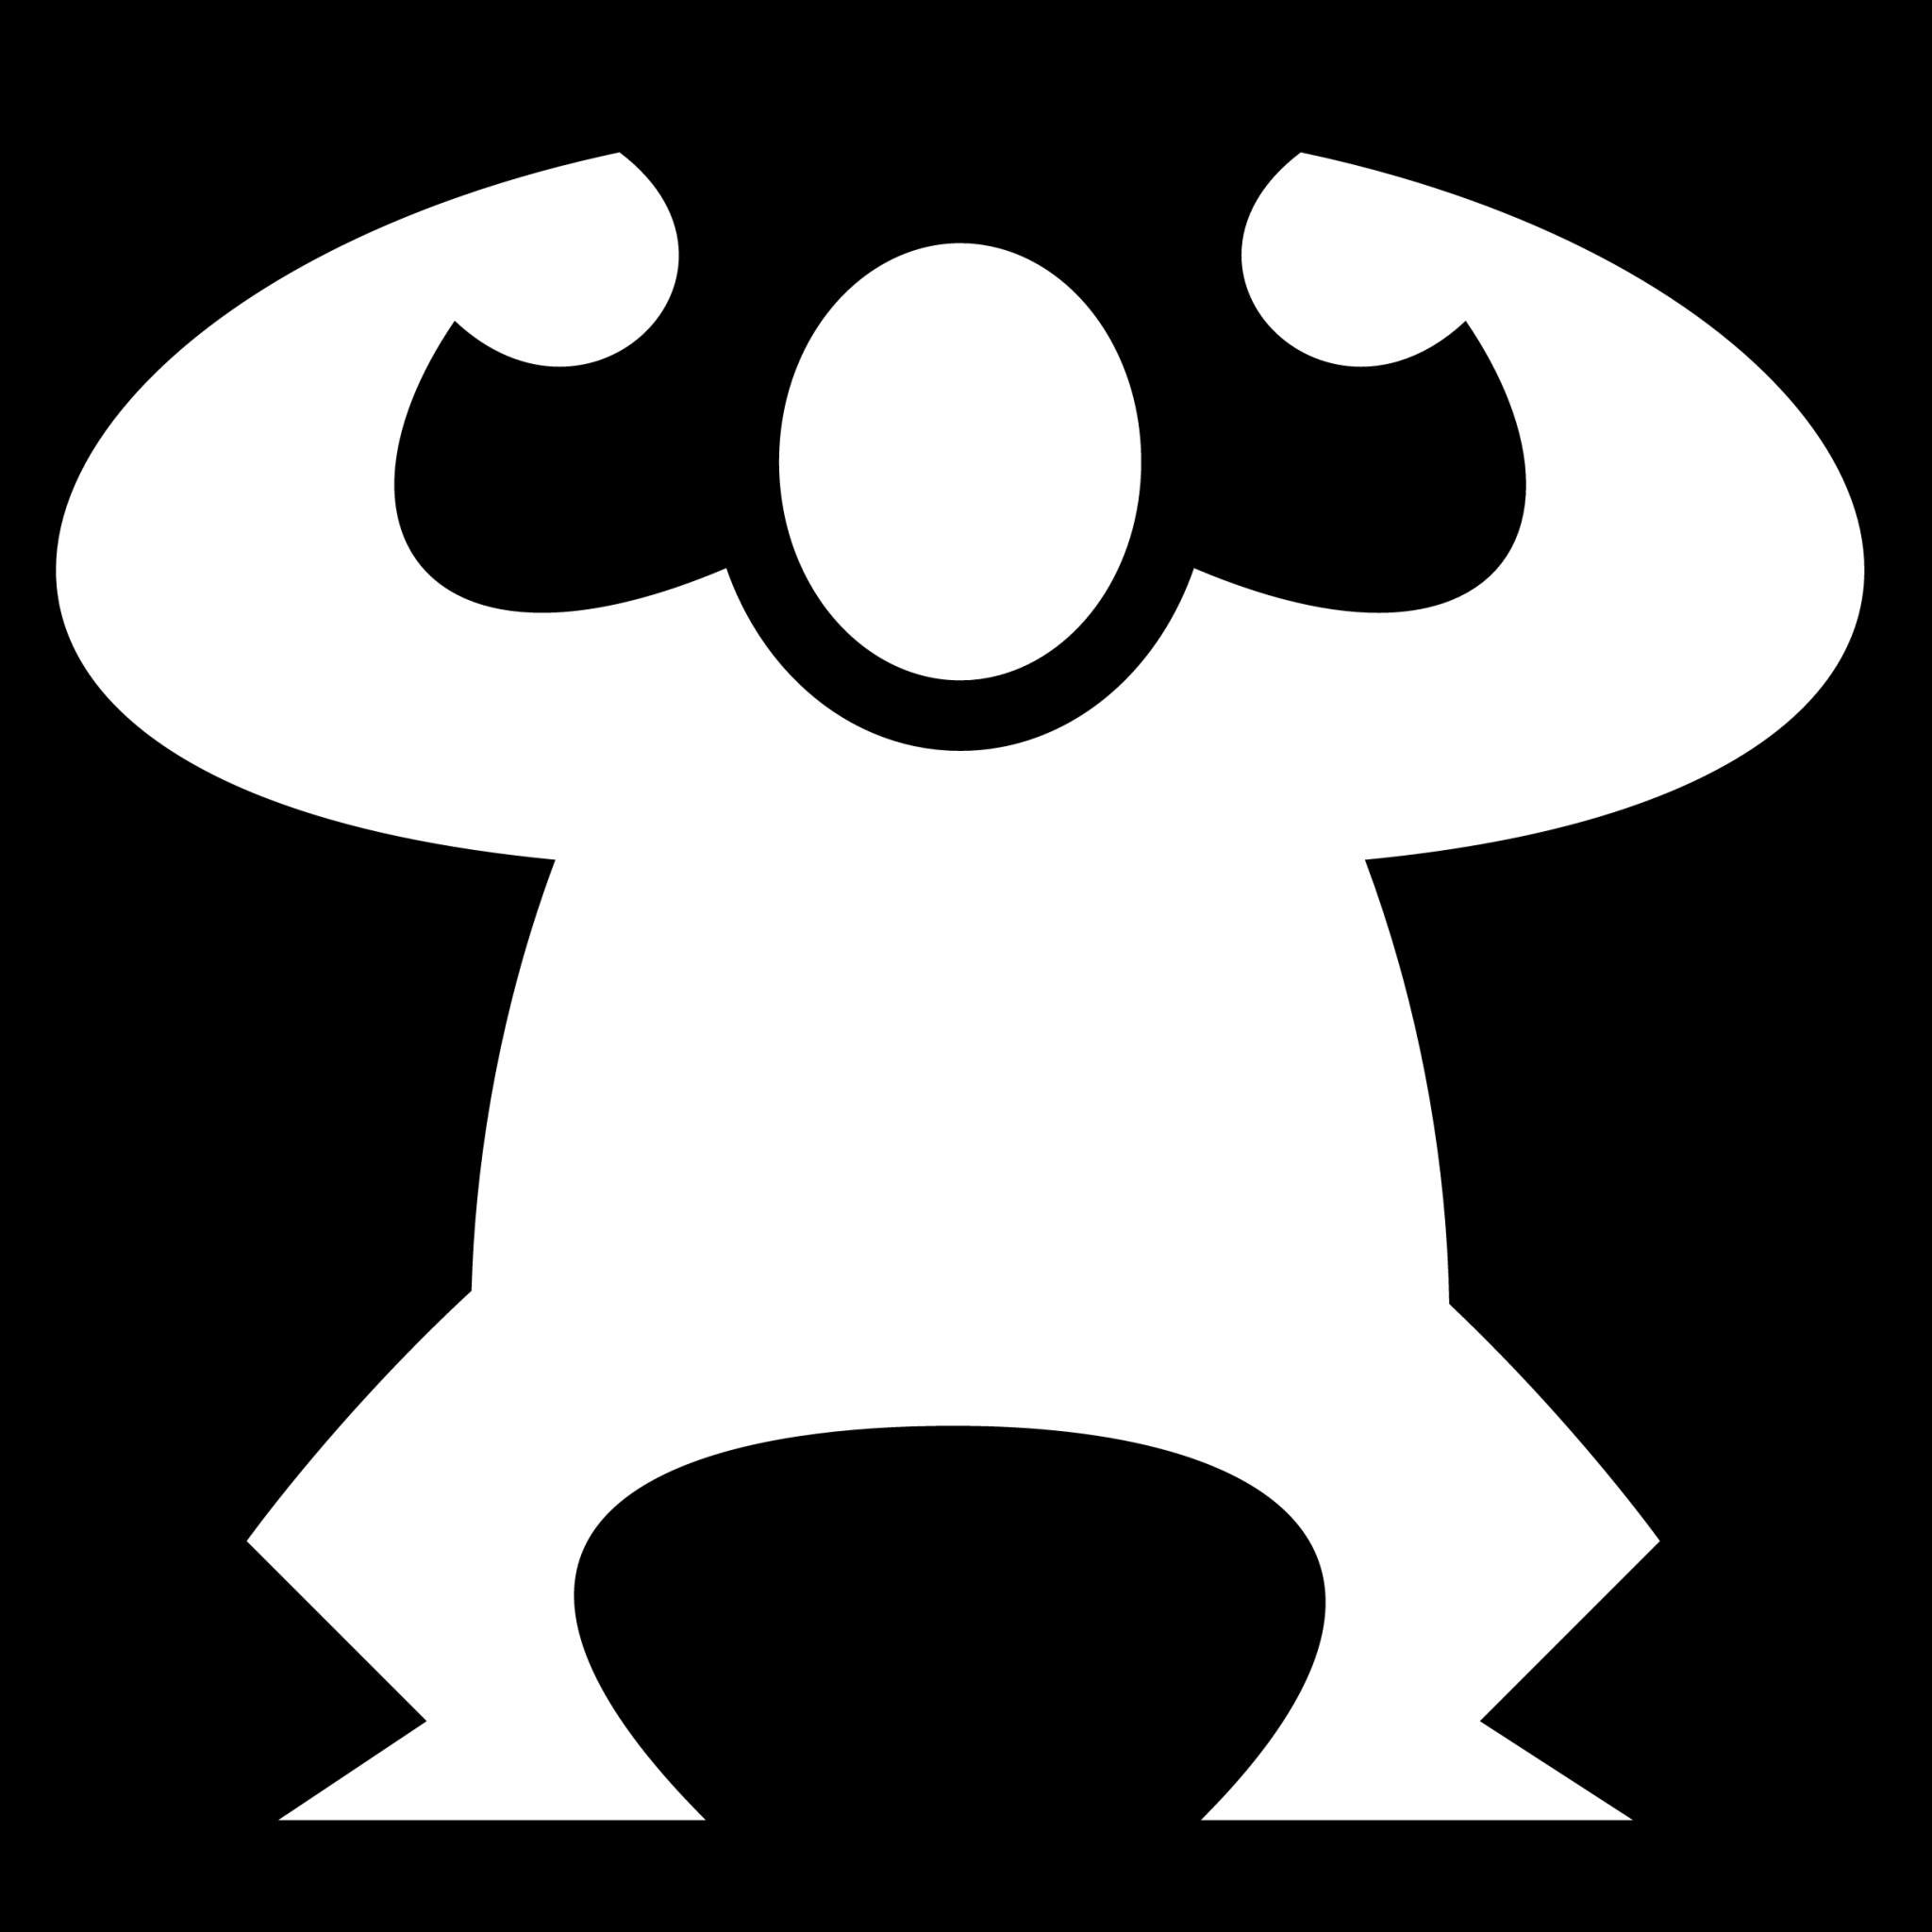 muscle fat icon